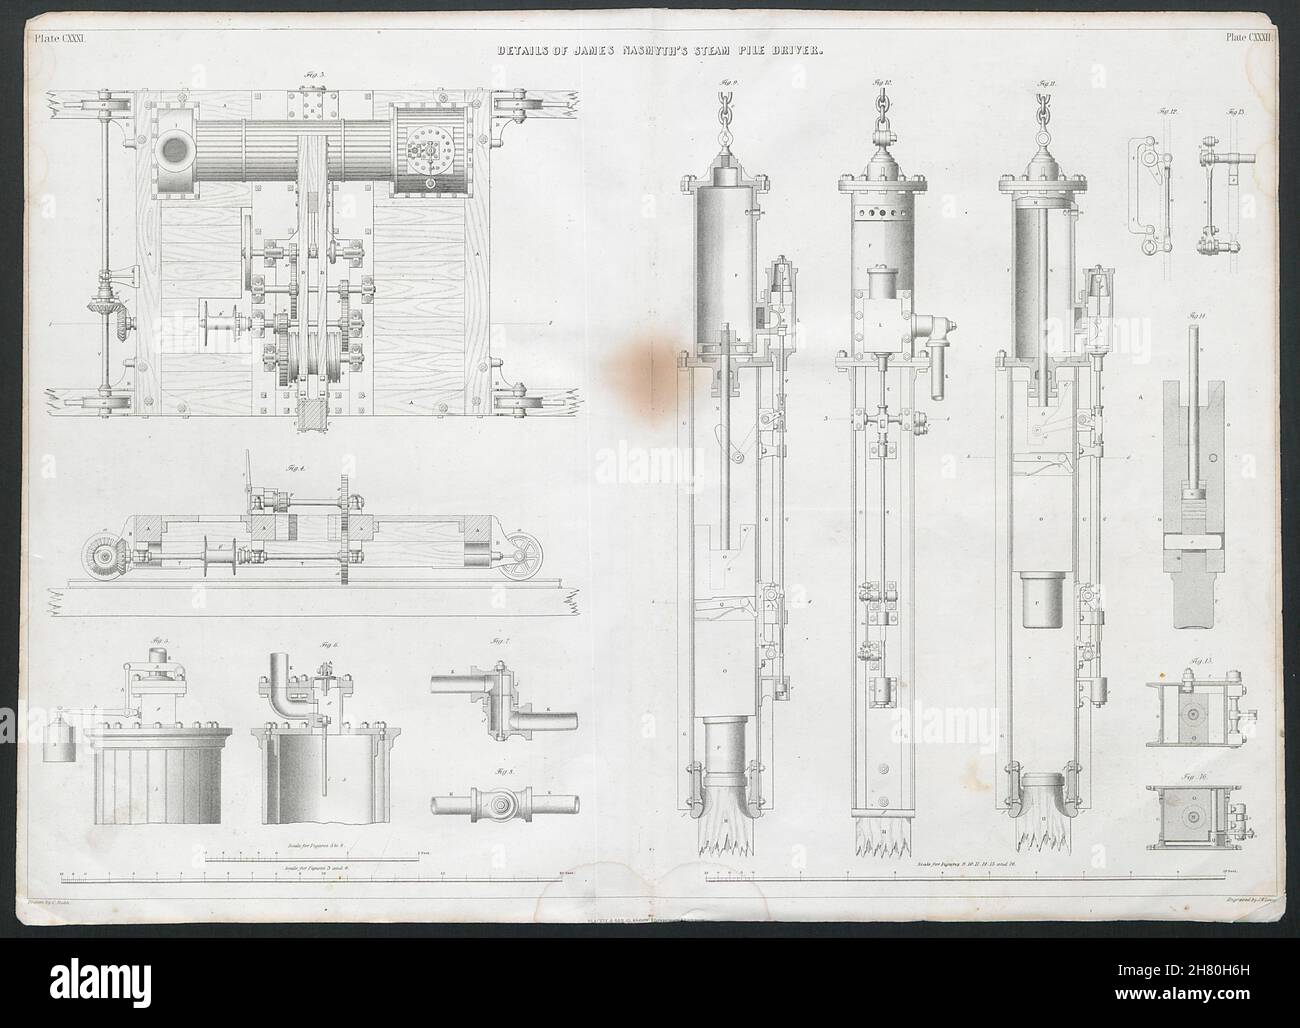 VICTORIAN ENGINEERING DRAWING James Nasmyth's steam pile driver details 1847 Stock Photo